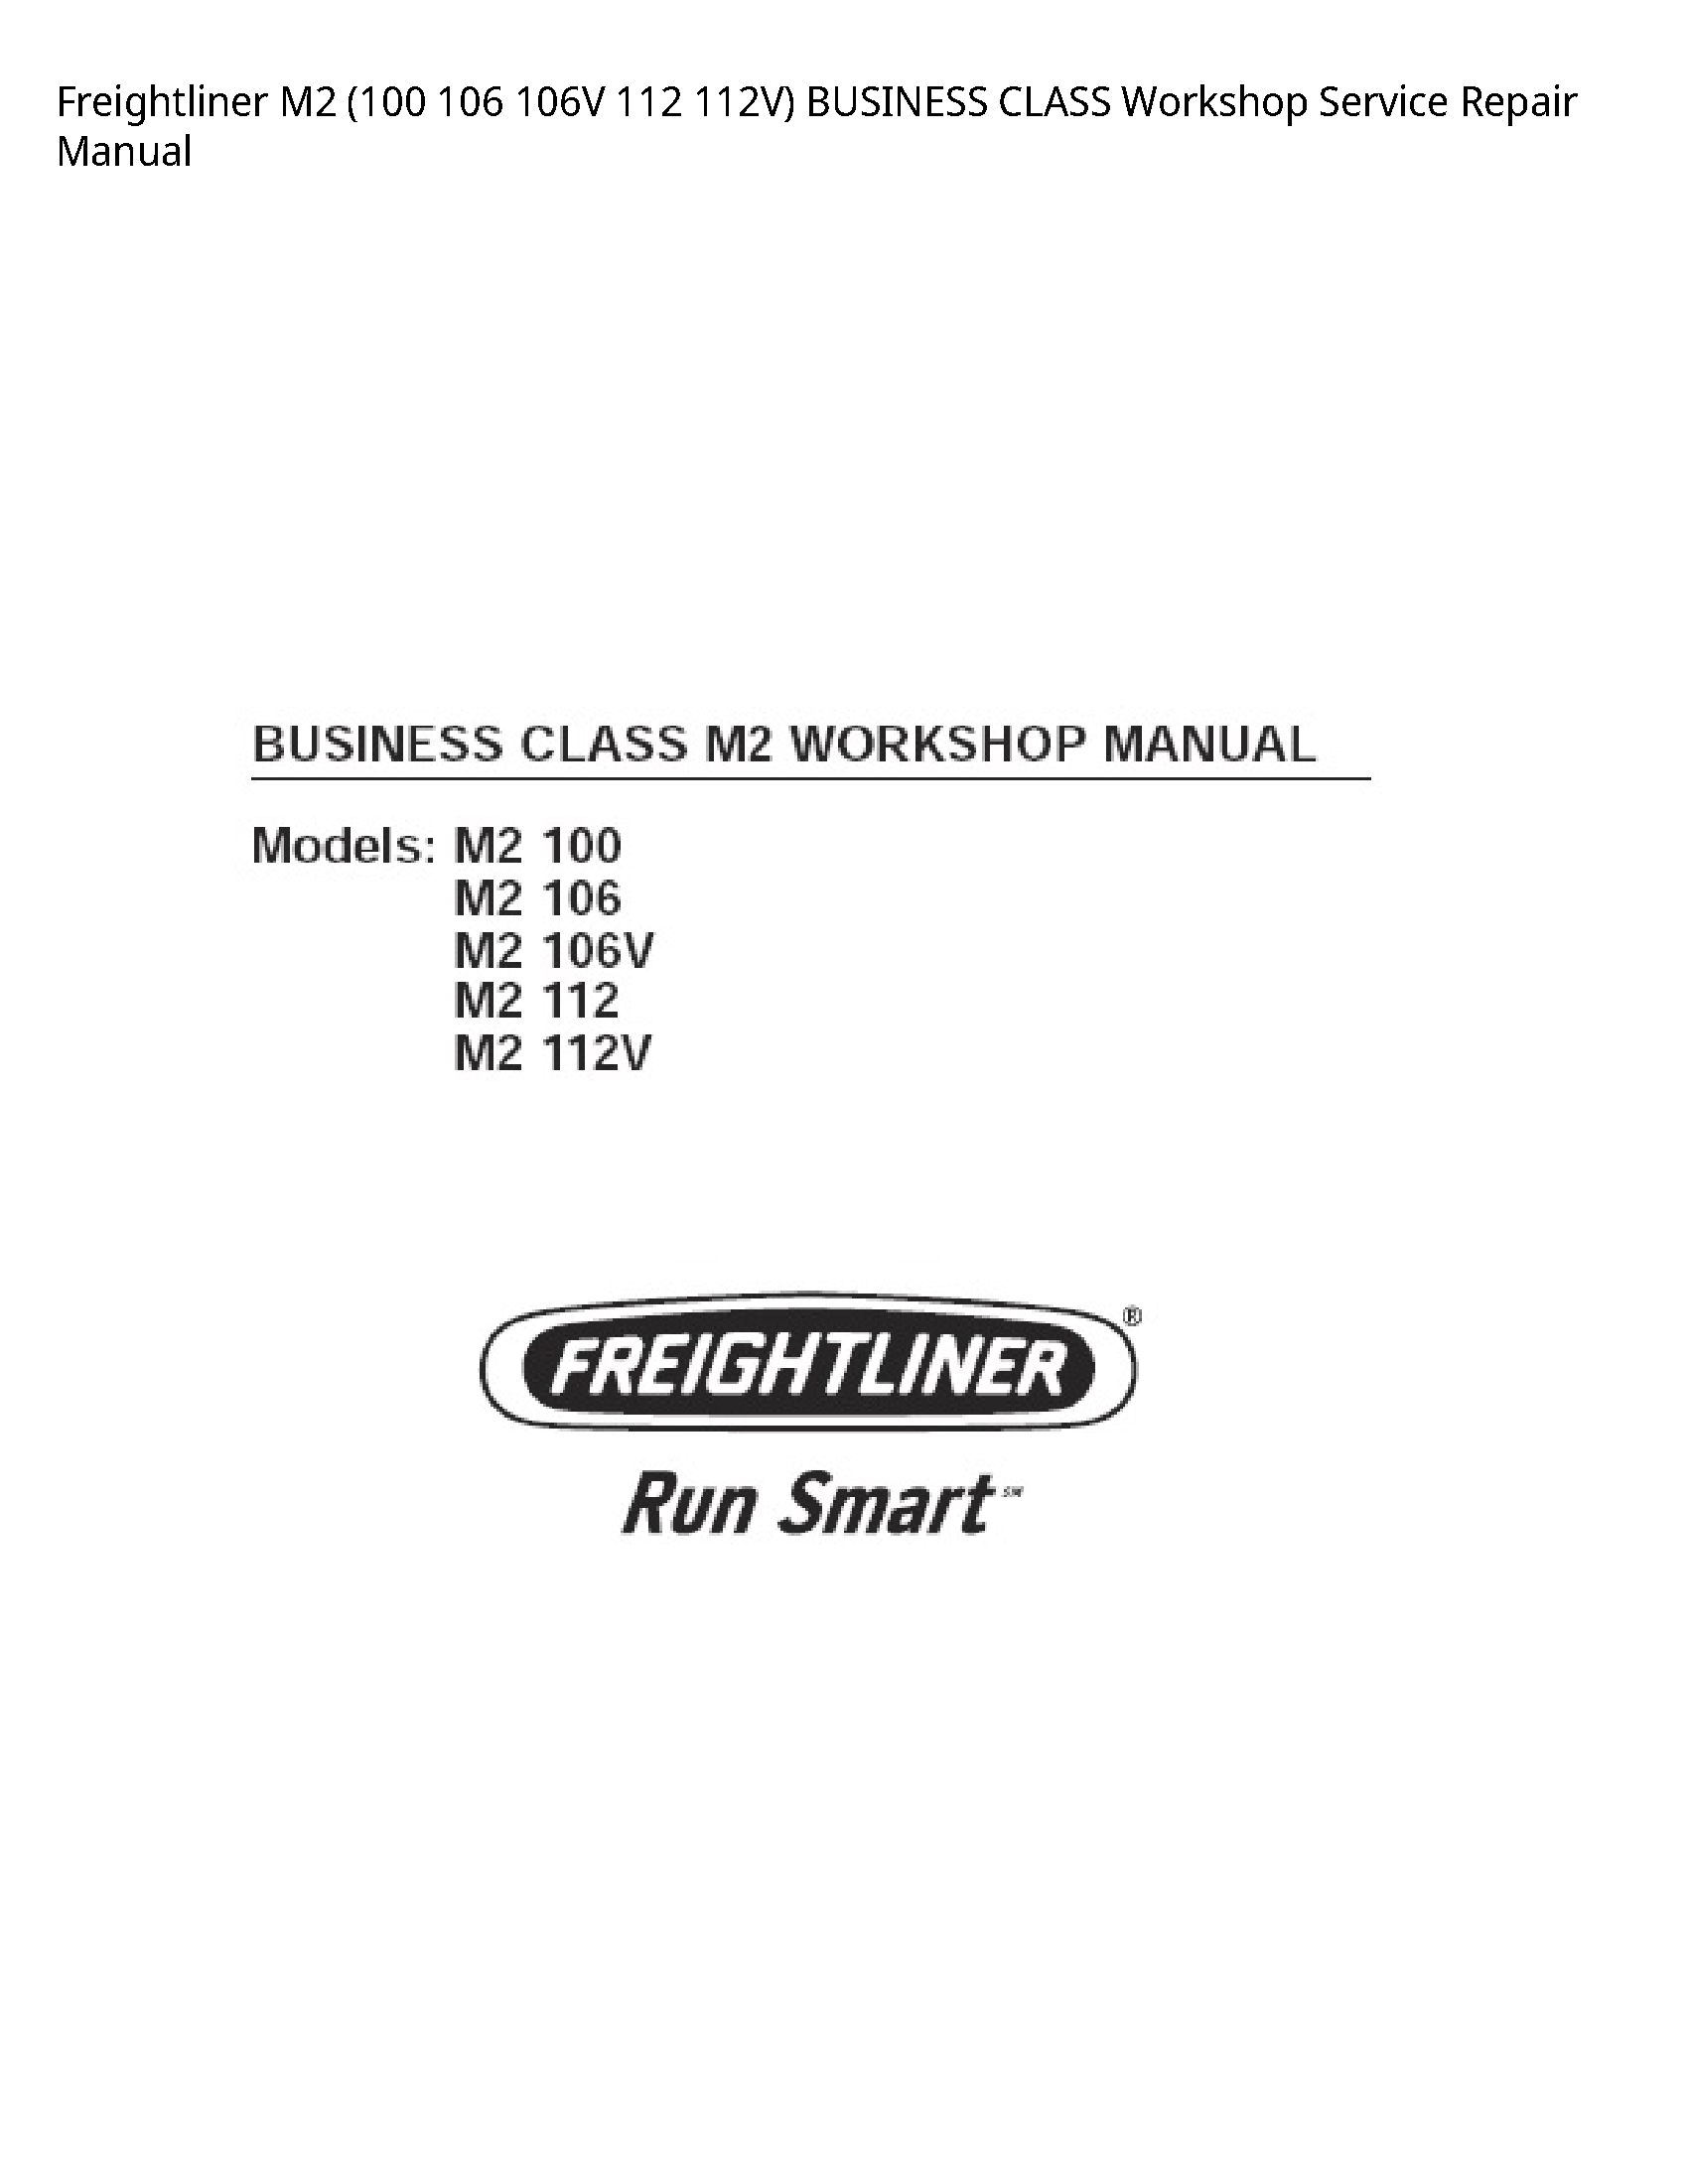 Freightliner M2 BUSINESS CLASS manual